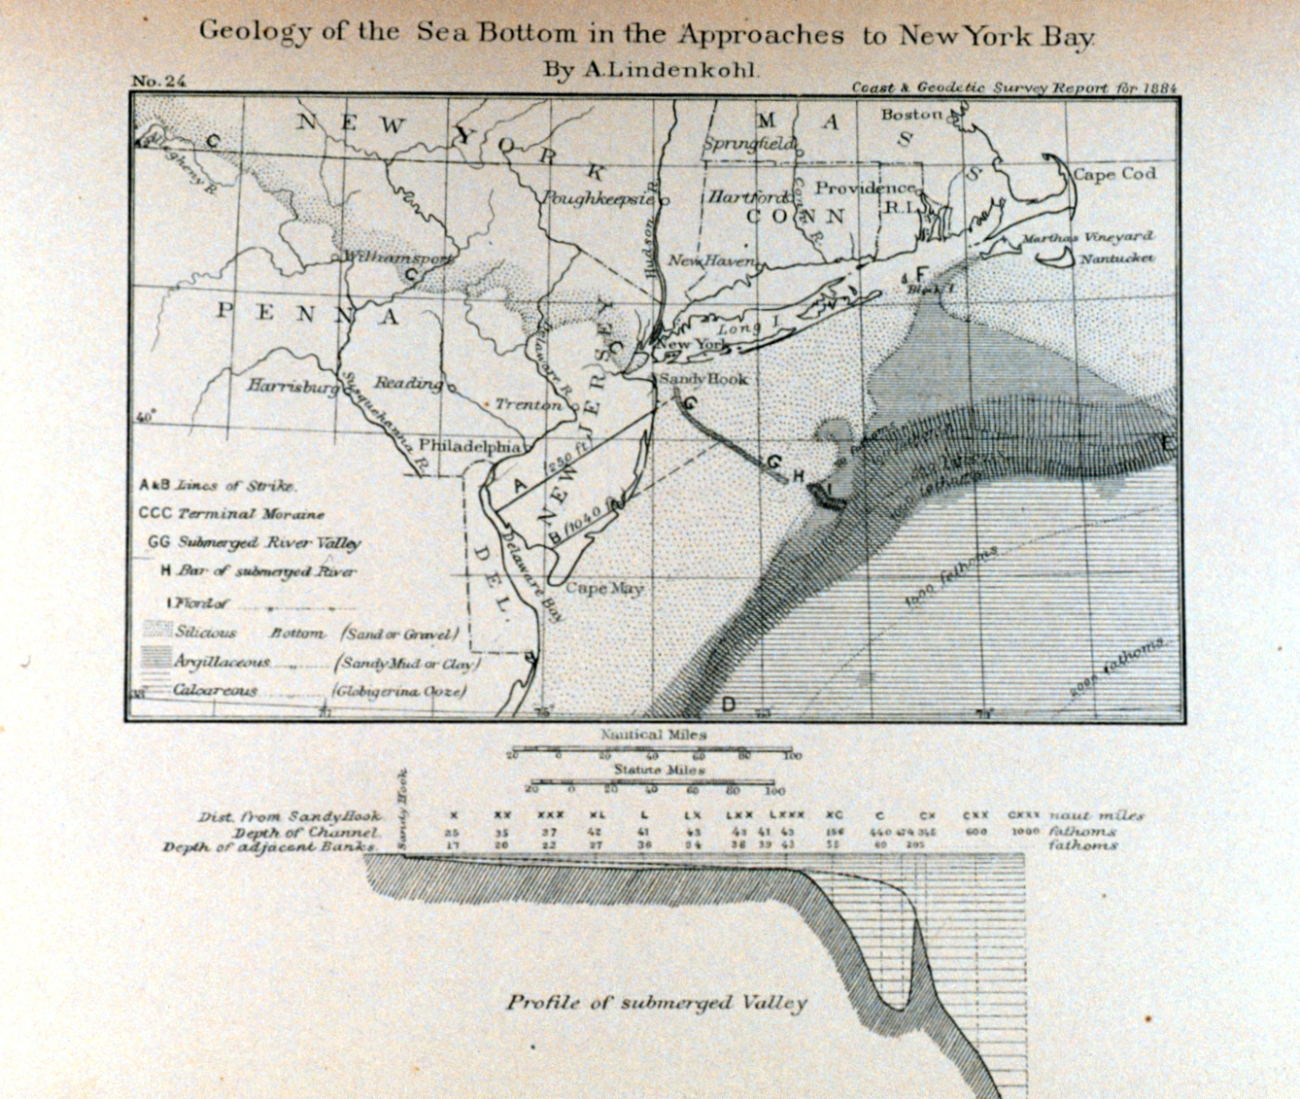 Map of Geology of the Sea Bottom in the Approaches to New York Bay